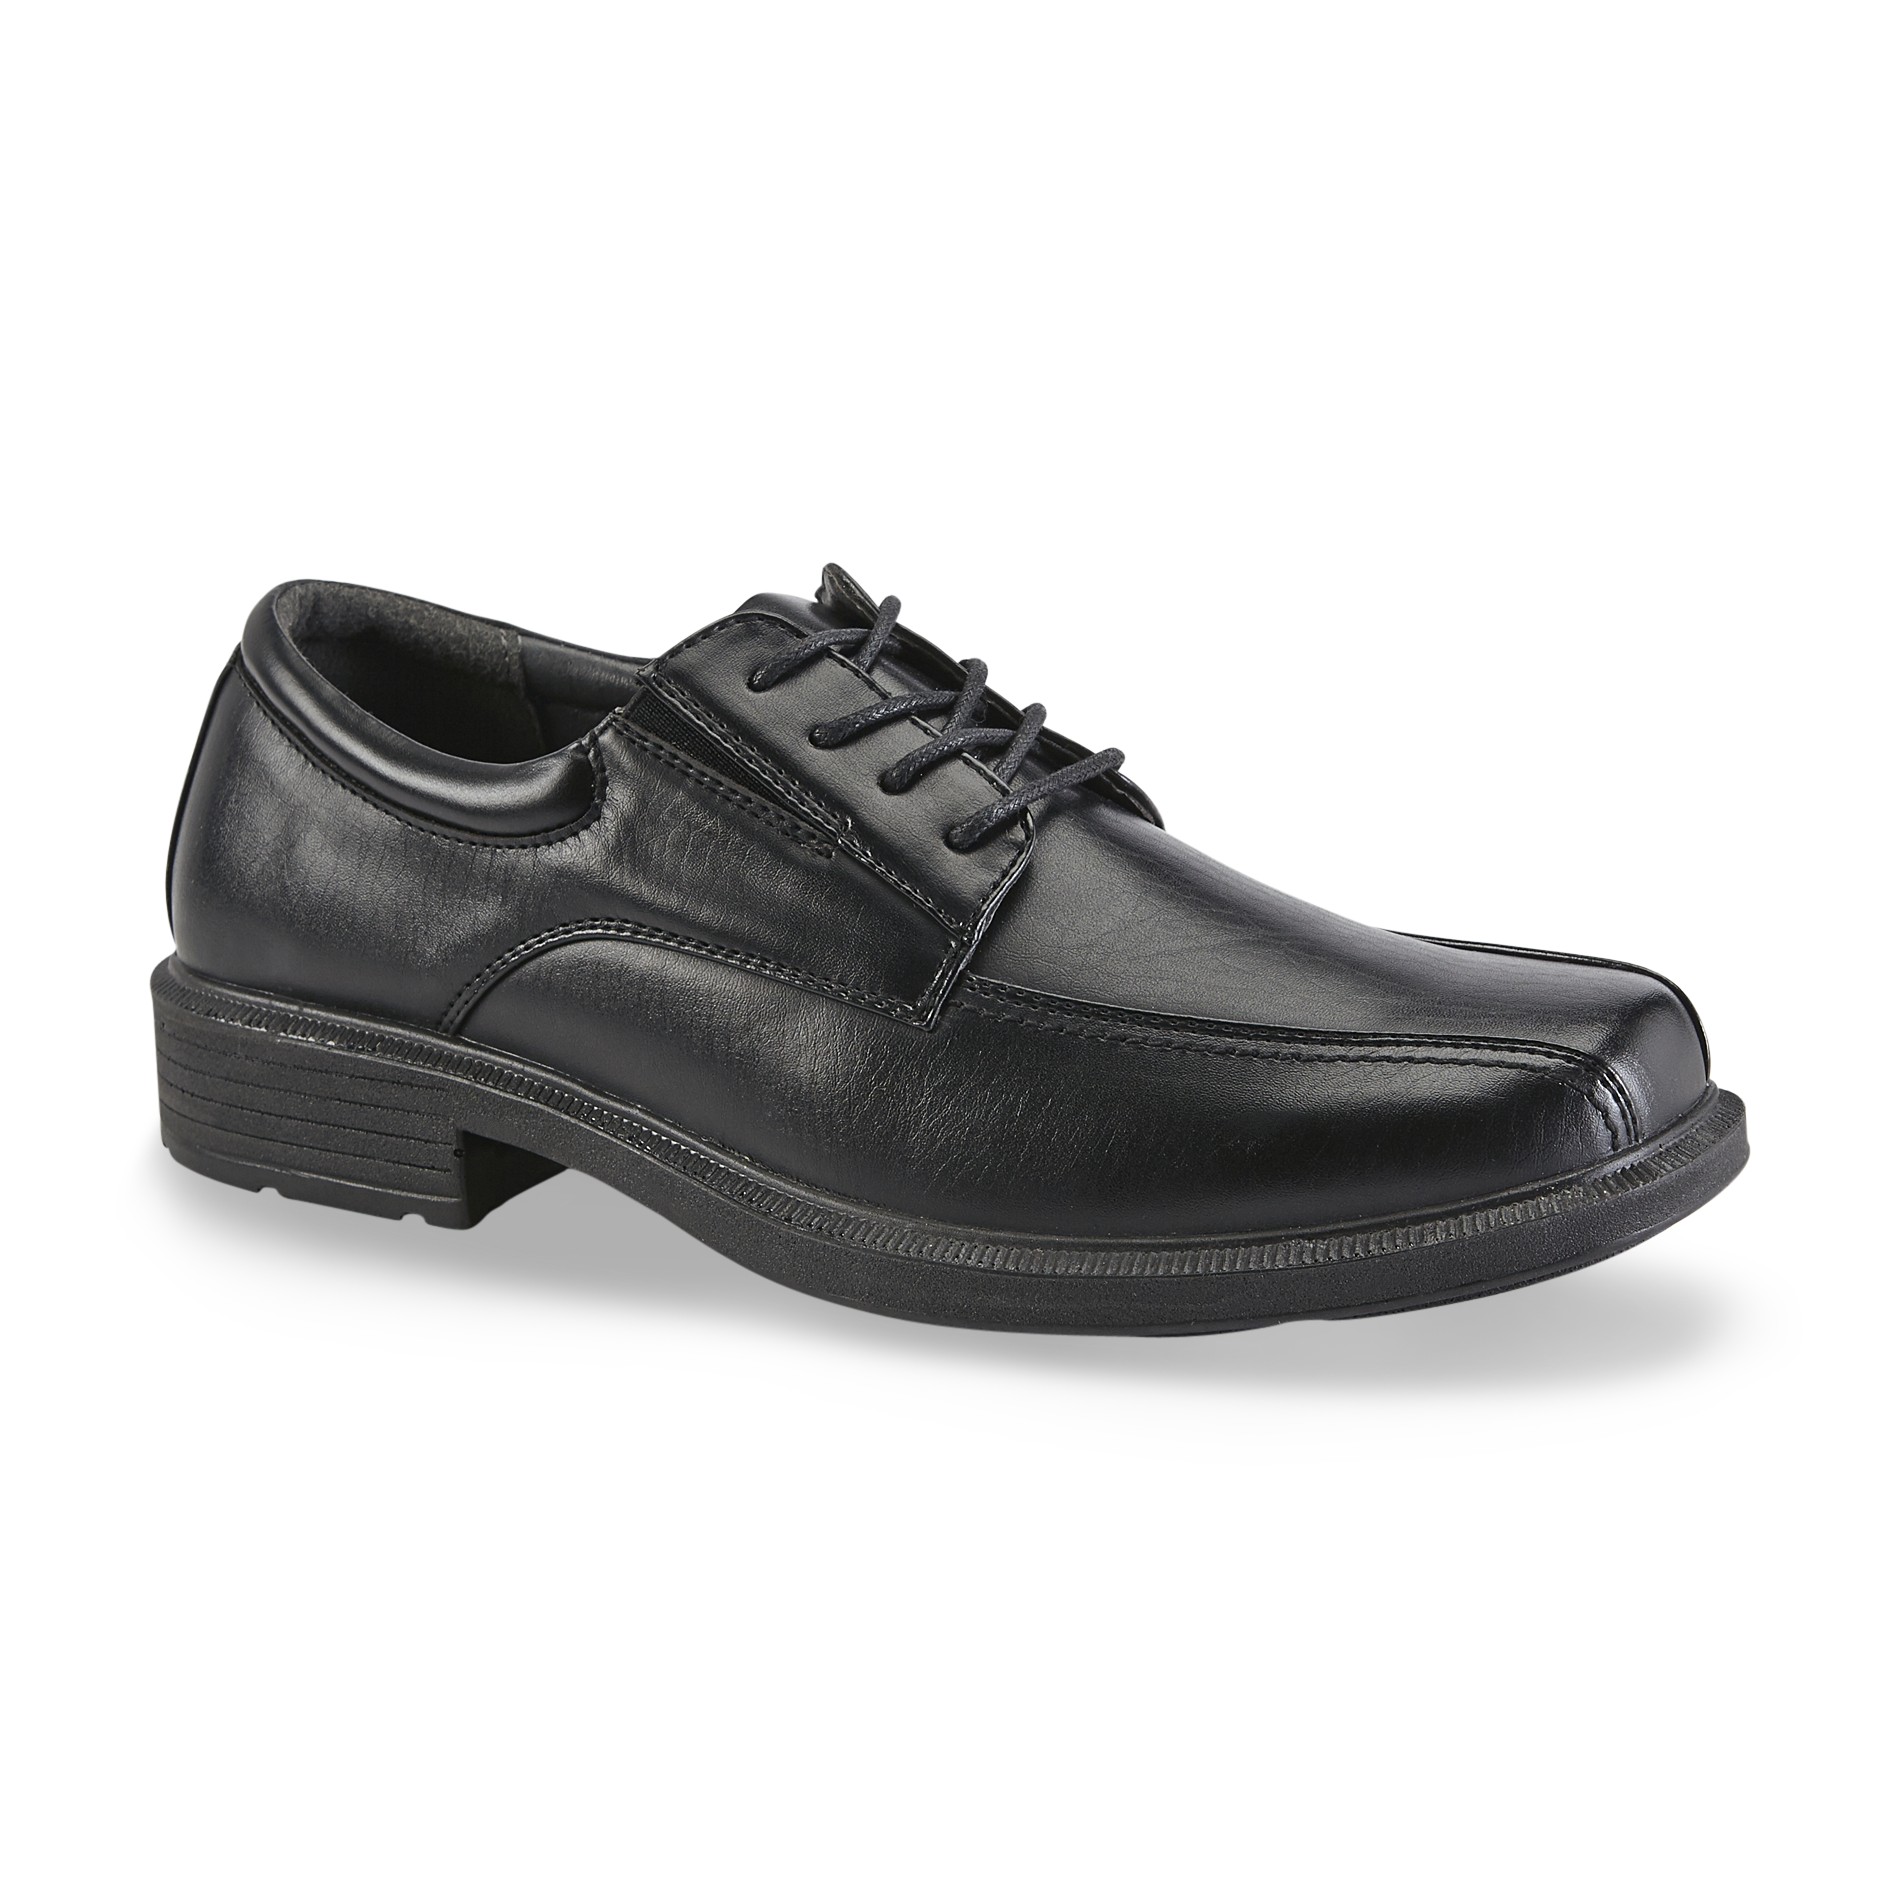 Men's Dress Shoes - Oxfords, Loafers 